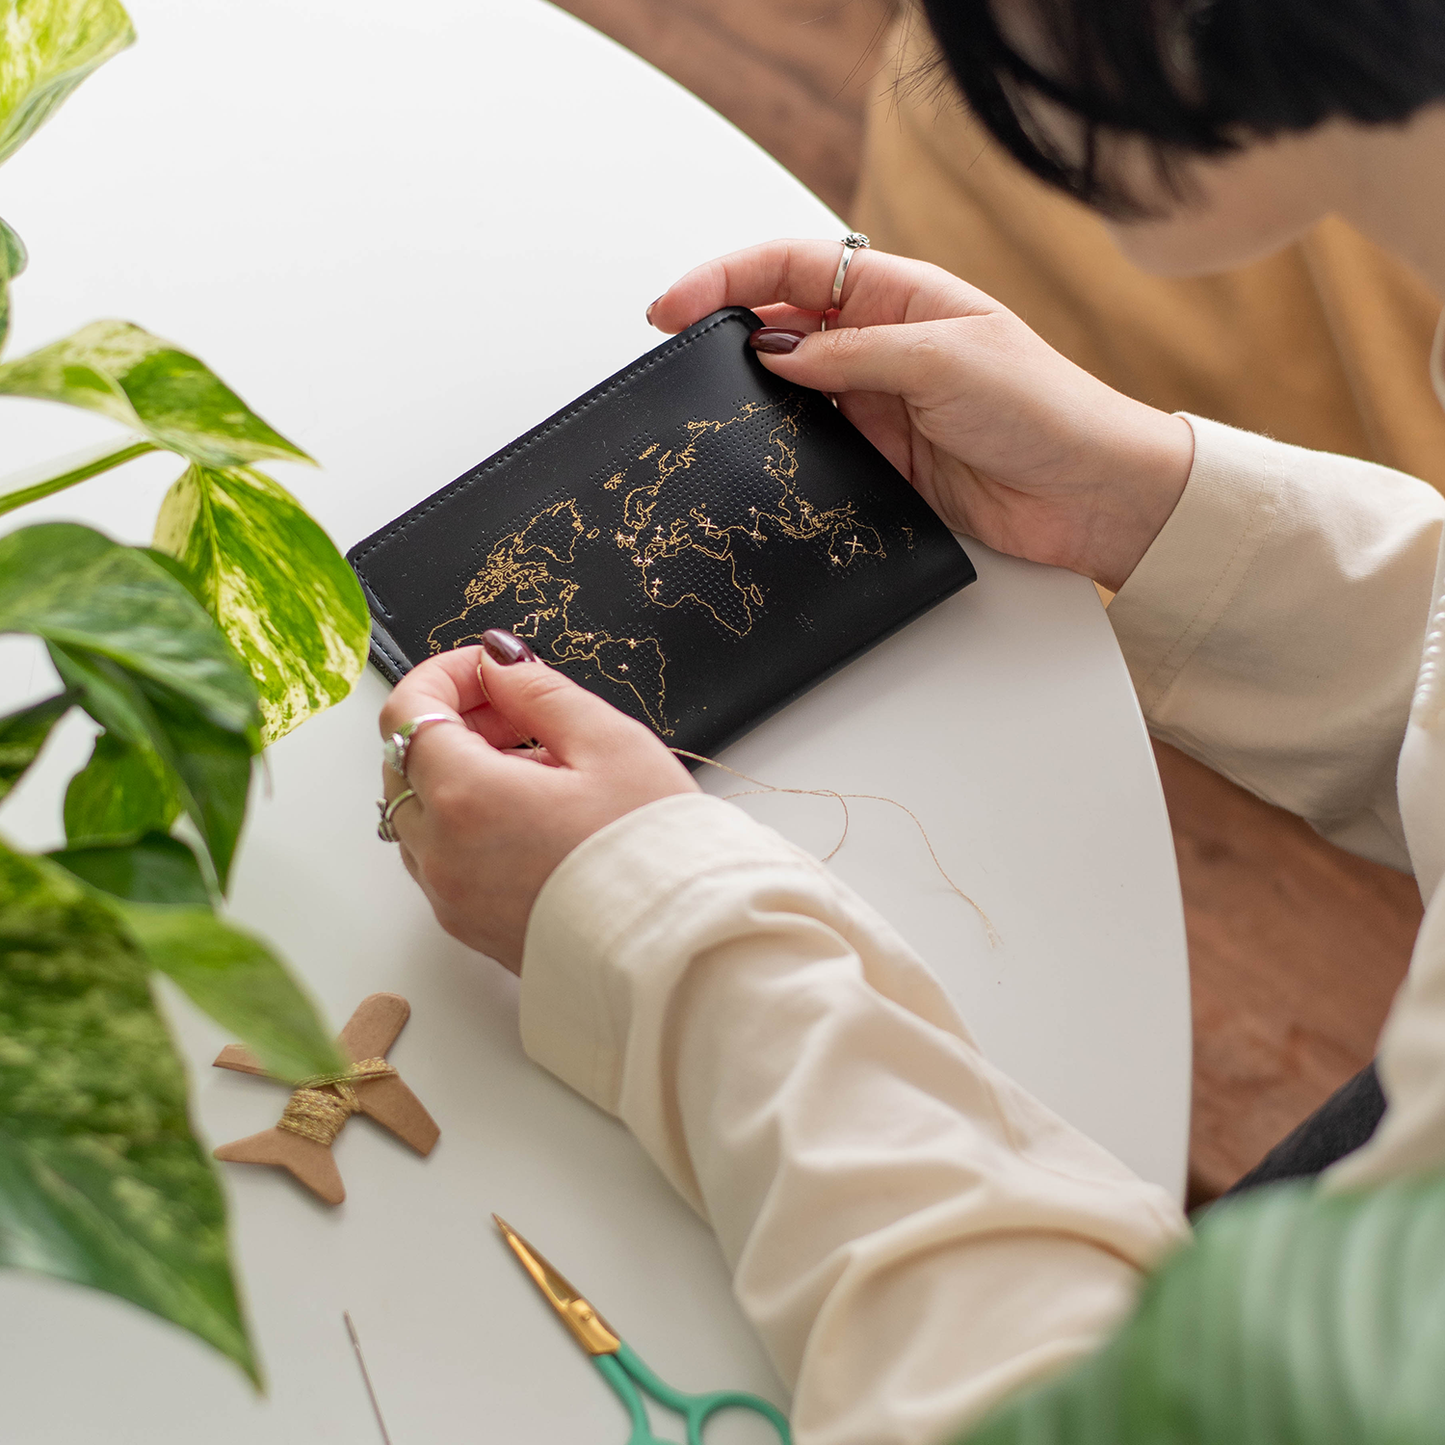 image of someone actively sewing stitching an x over the countries and areas they have visited on their black passport cover with gold thread